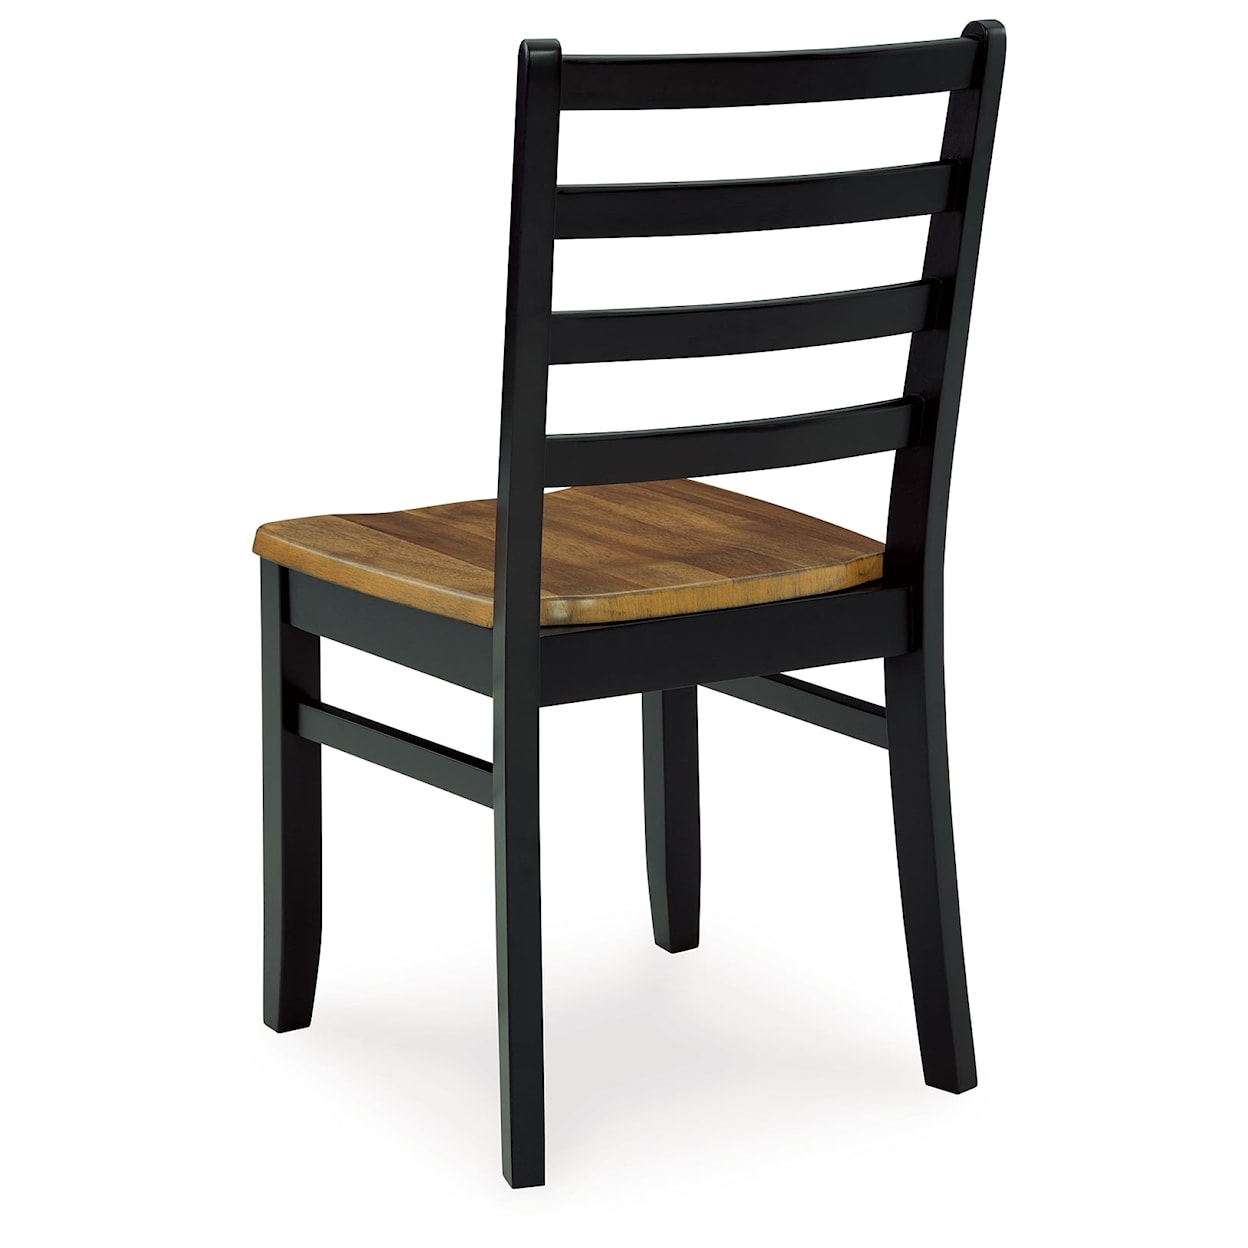 Signature Blondon Dining Table And 6 Chairs (Set Of 7)